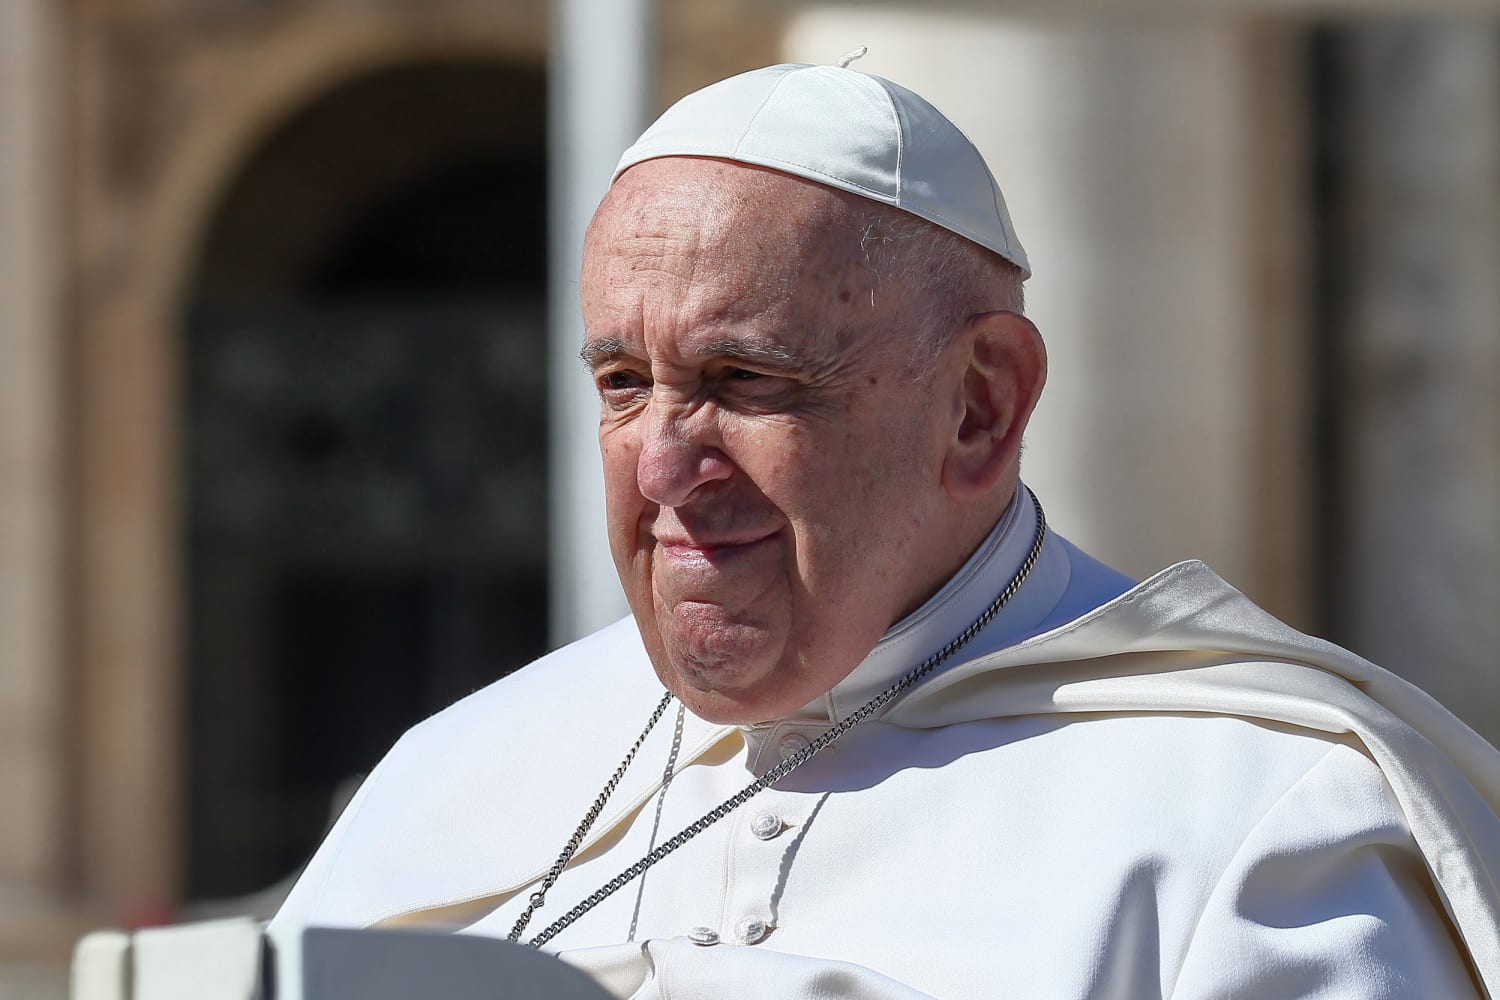 Pope Francis to spend several days in hospital after complaining of breathing difficulties